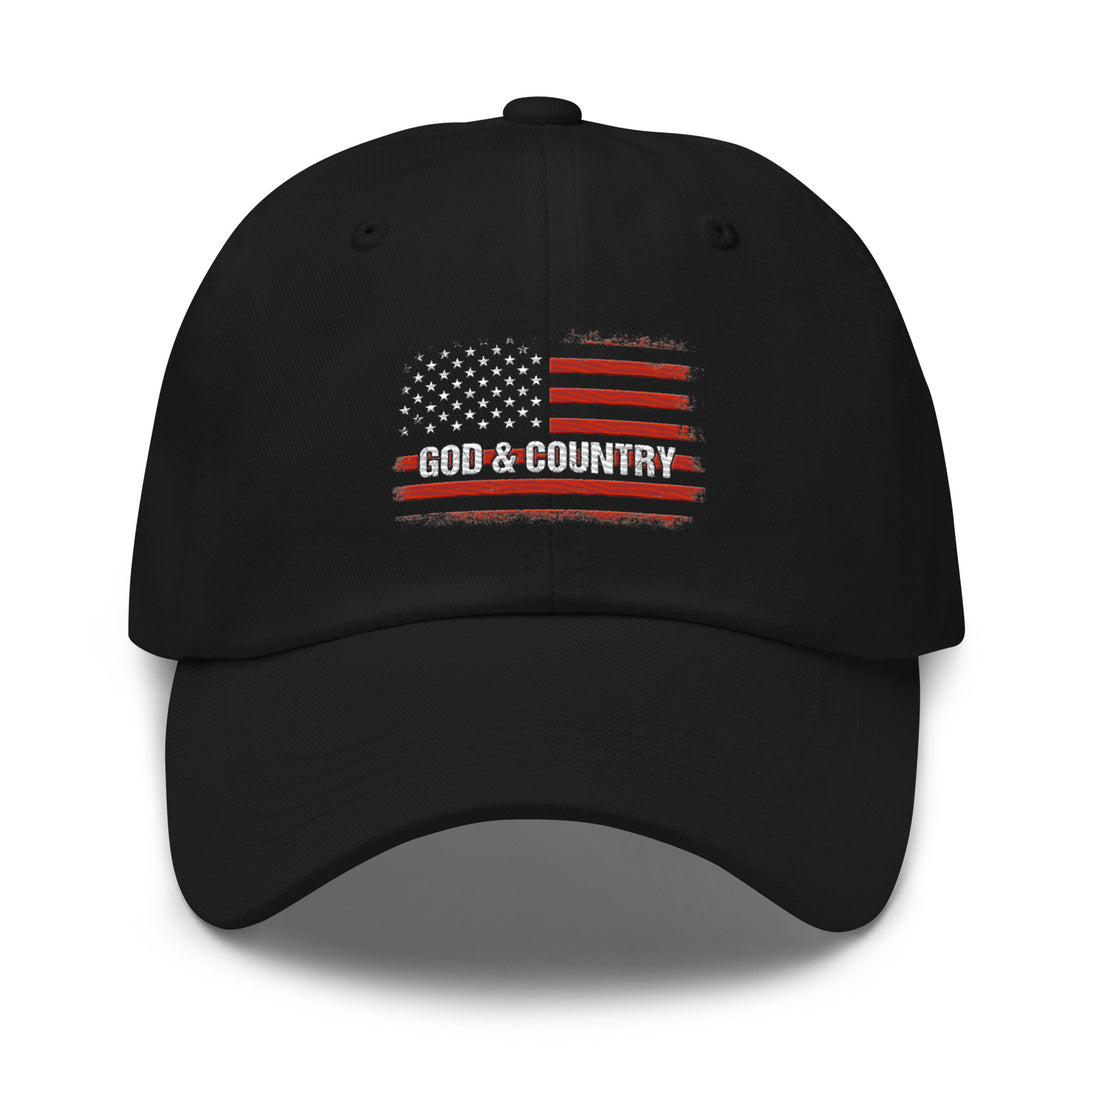 God and Country hat